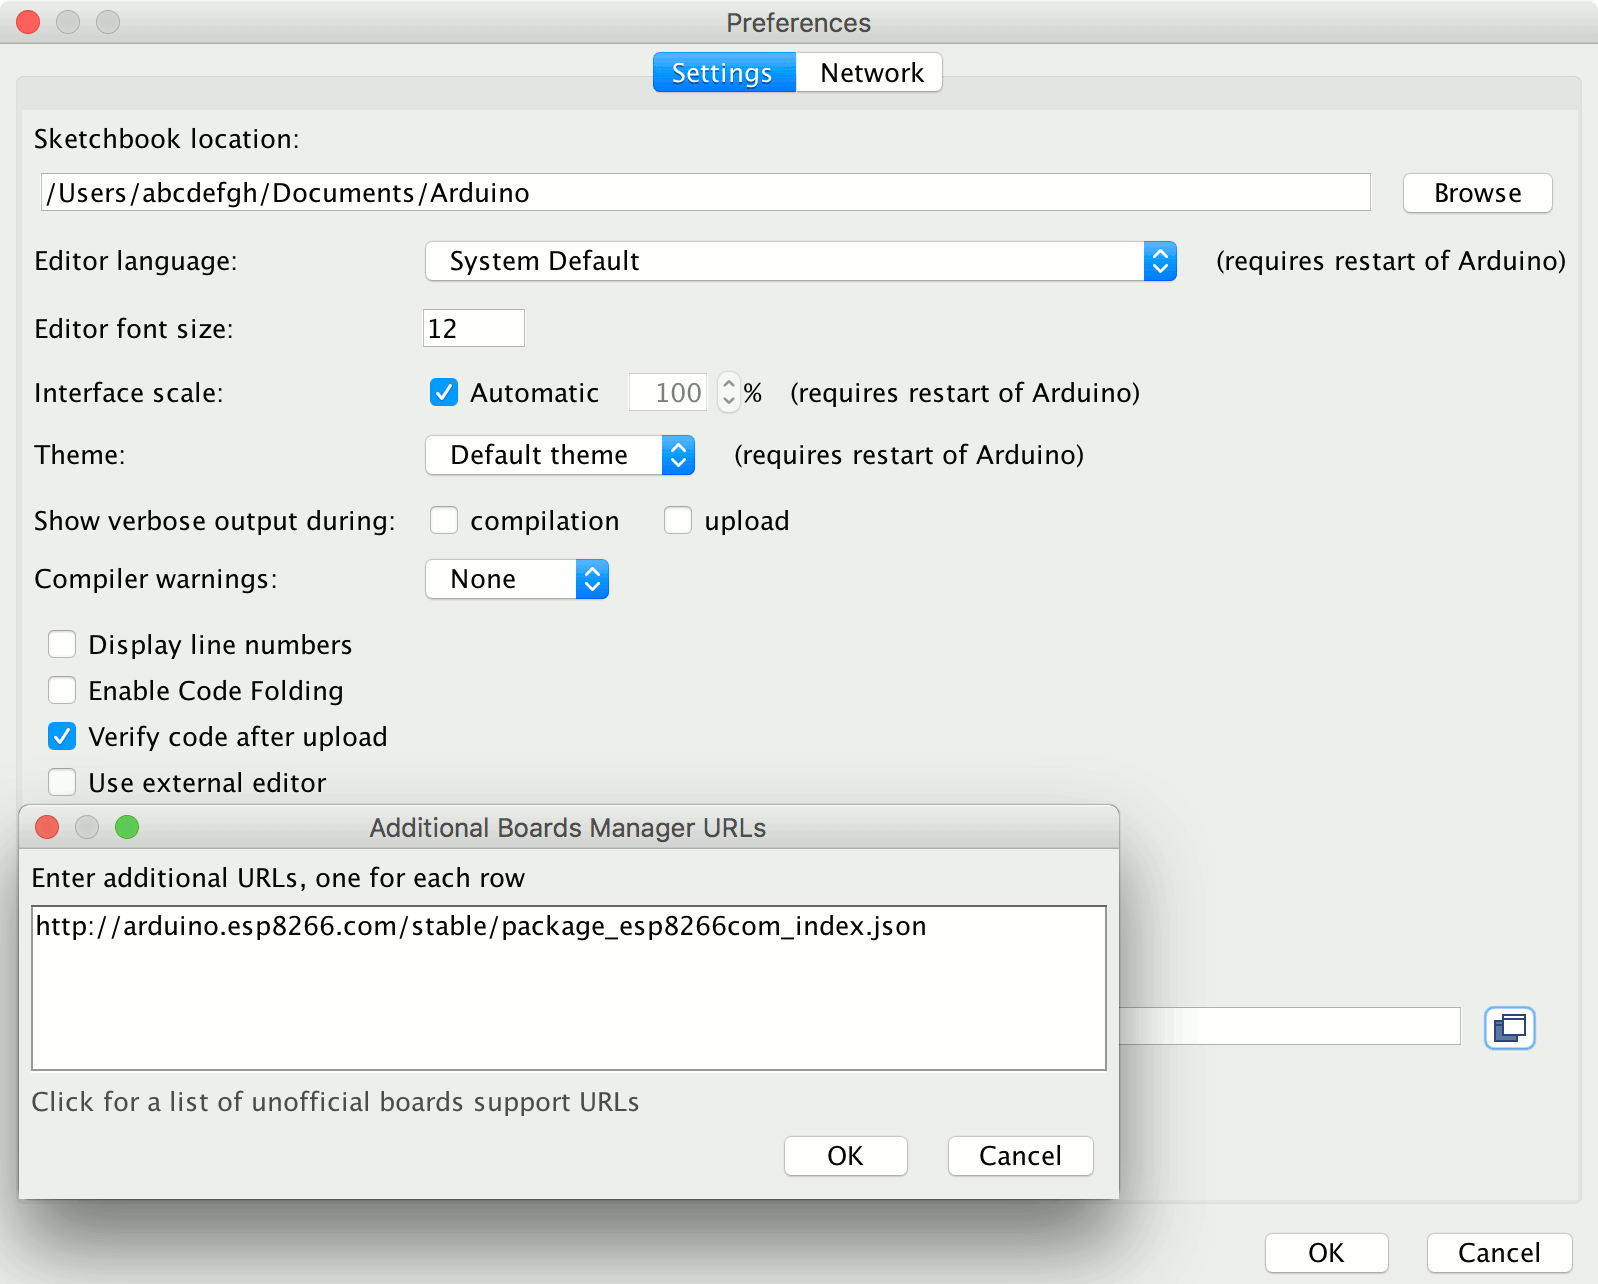 Mac Arduino IDE 1.8.7 Preferences window with ESP8266 core url inside additional board managers urls